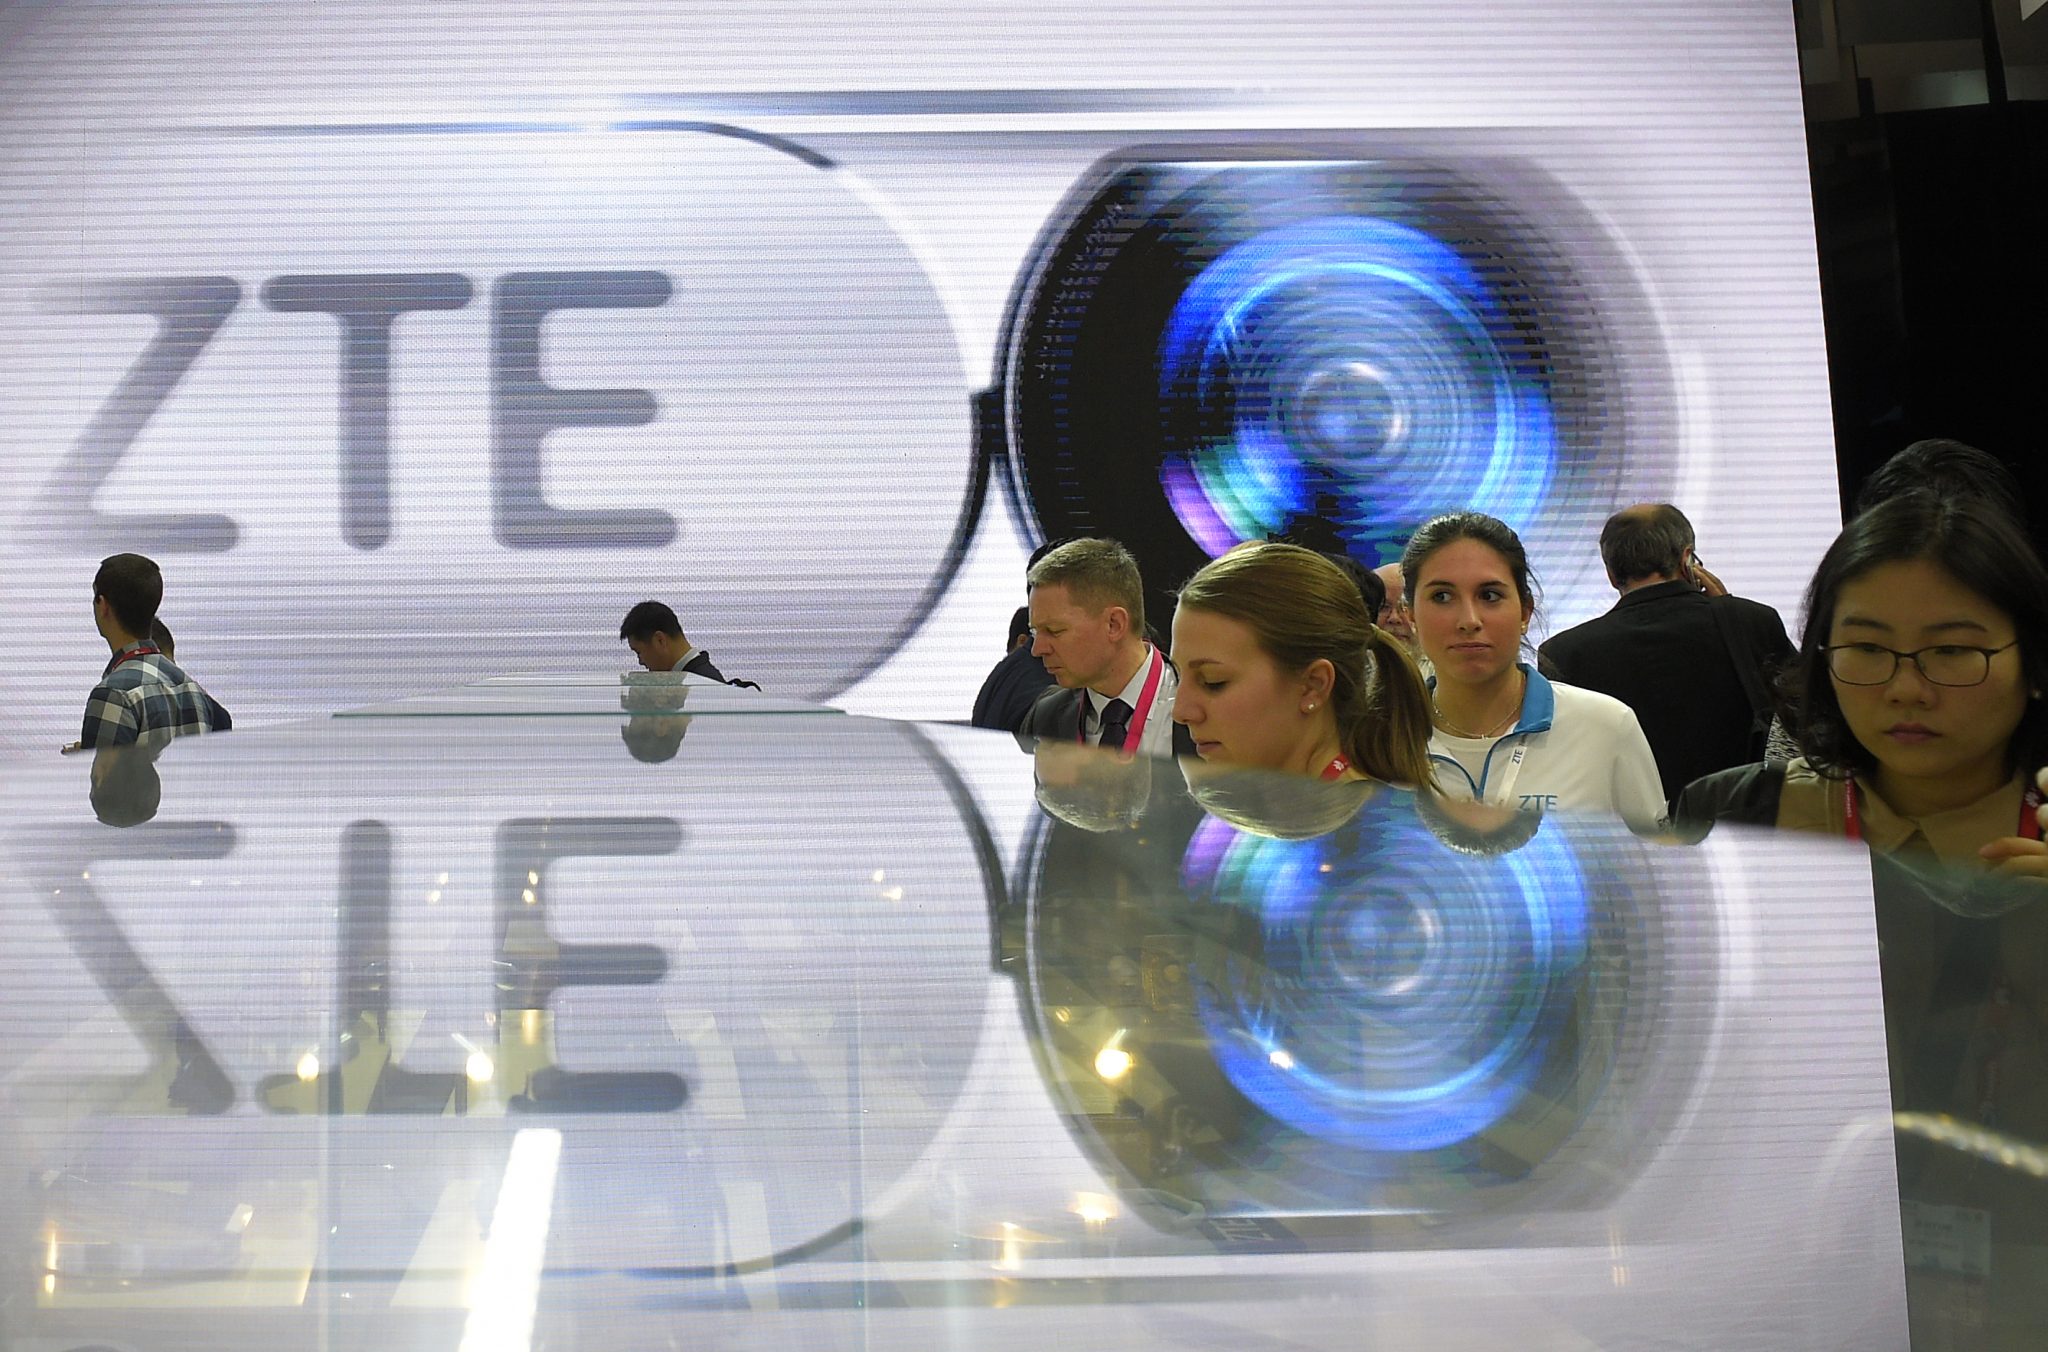 (FILES) This file photo taken on February 23, 2016 shows visitors testing smart phones at the ZTE's stand during the Mobile World Congress in Barcelona. The US government has slapped $1.2 billion in fines on Chinese telecom giant ZTE for violations of US export controls for selling goods to Iran and North Korea, officials announced on March 7, 2017. It is the largest criminal penalty in US history in an export control case, government officials said. The company will pay $892 million, while another $300 million in penalties are suspended for seven years. ZTE also agreed to plead guilty to three charges, including obstructing justice for hiding information from government investigators, the officials said. The agreement is subject to court approval.  / AFP PHOTO / LLUIS GENE